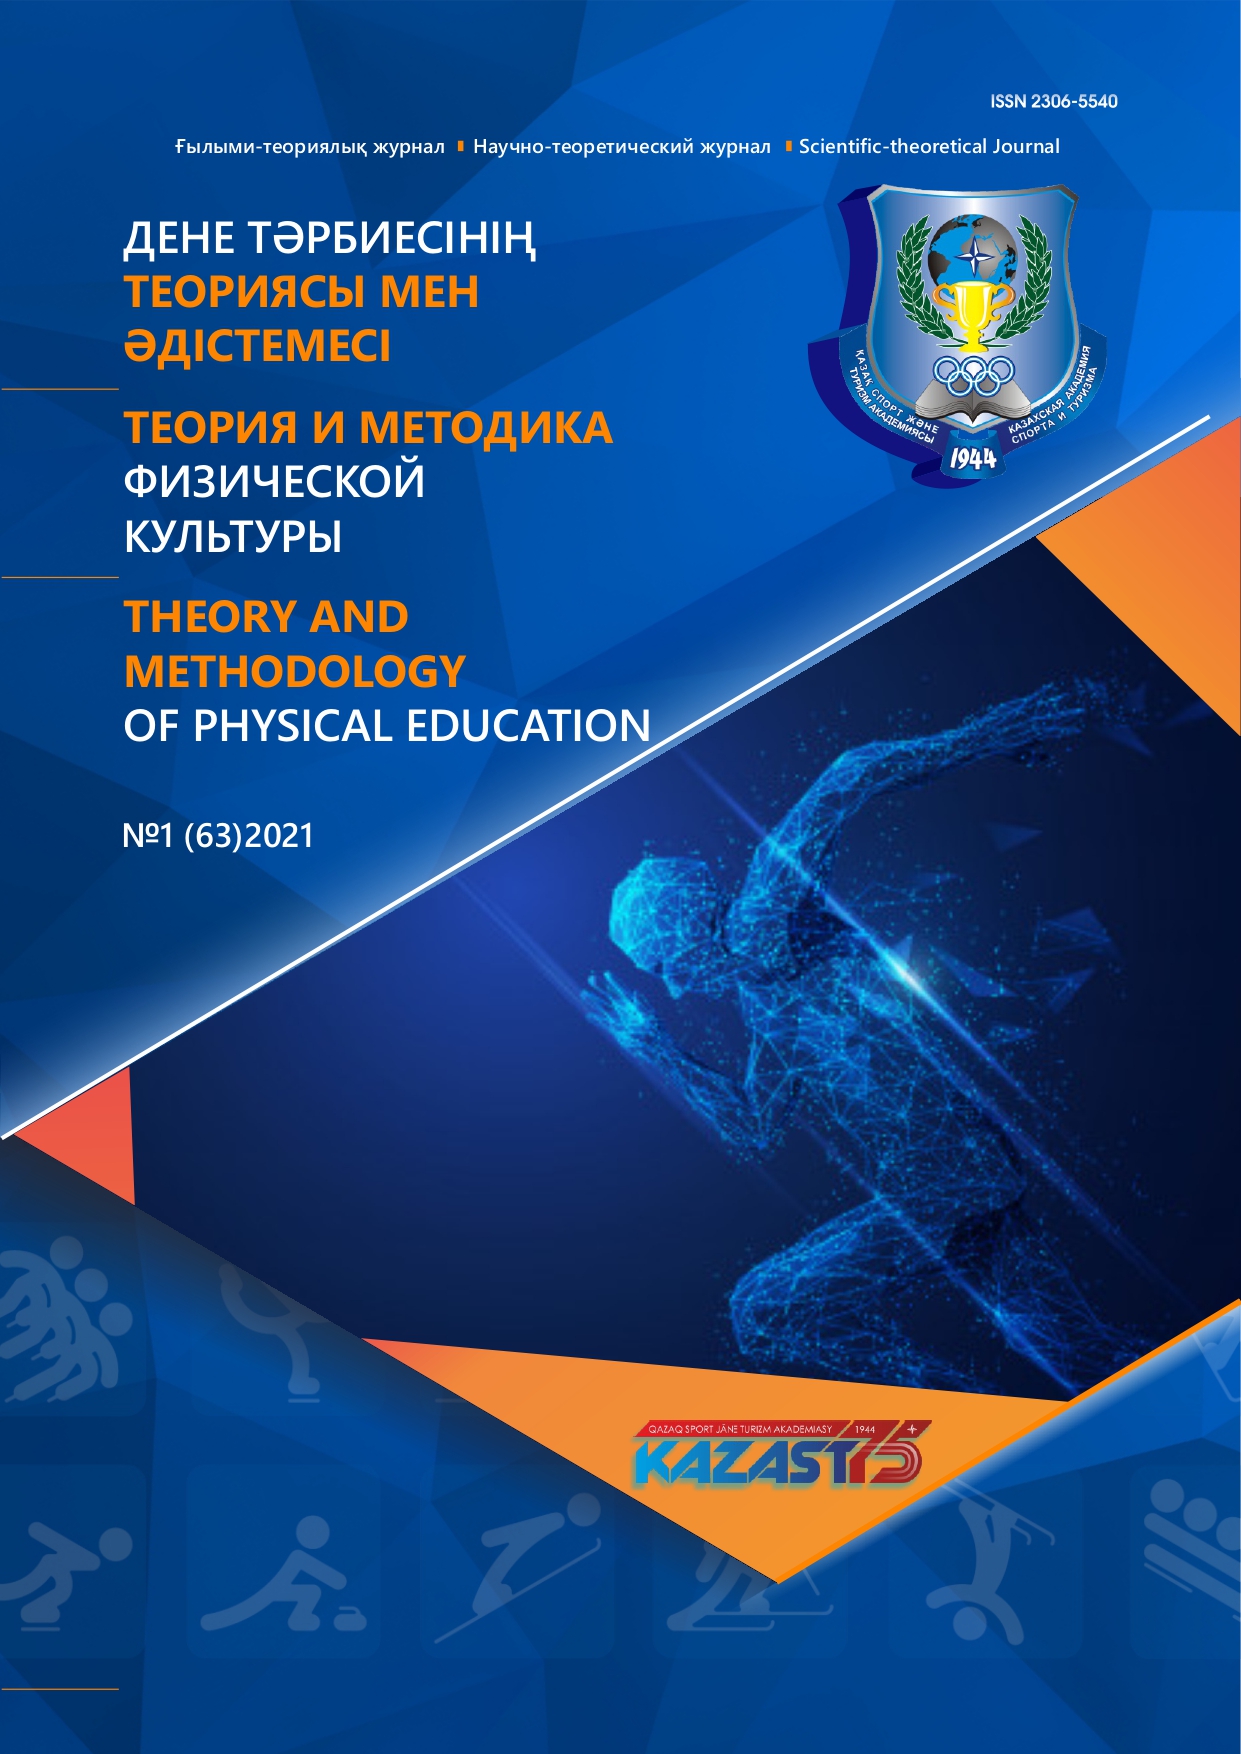 Theory and Methodology of Physical Education No. 1(63). - 2021.